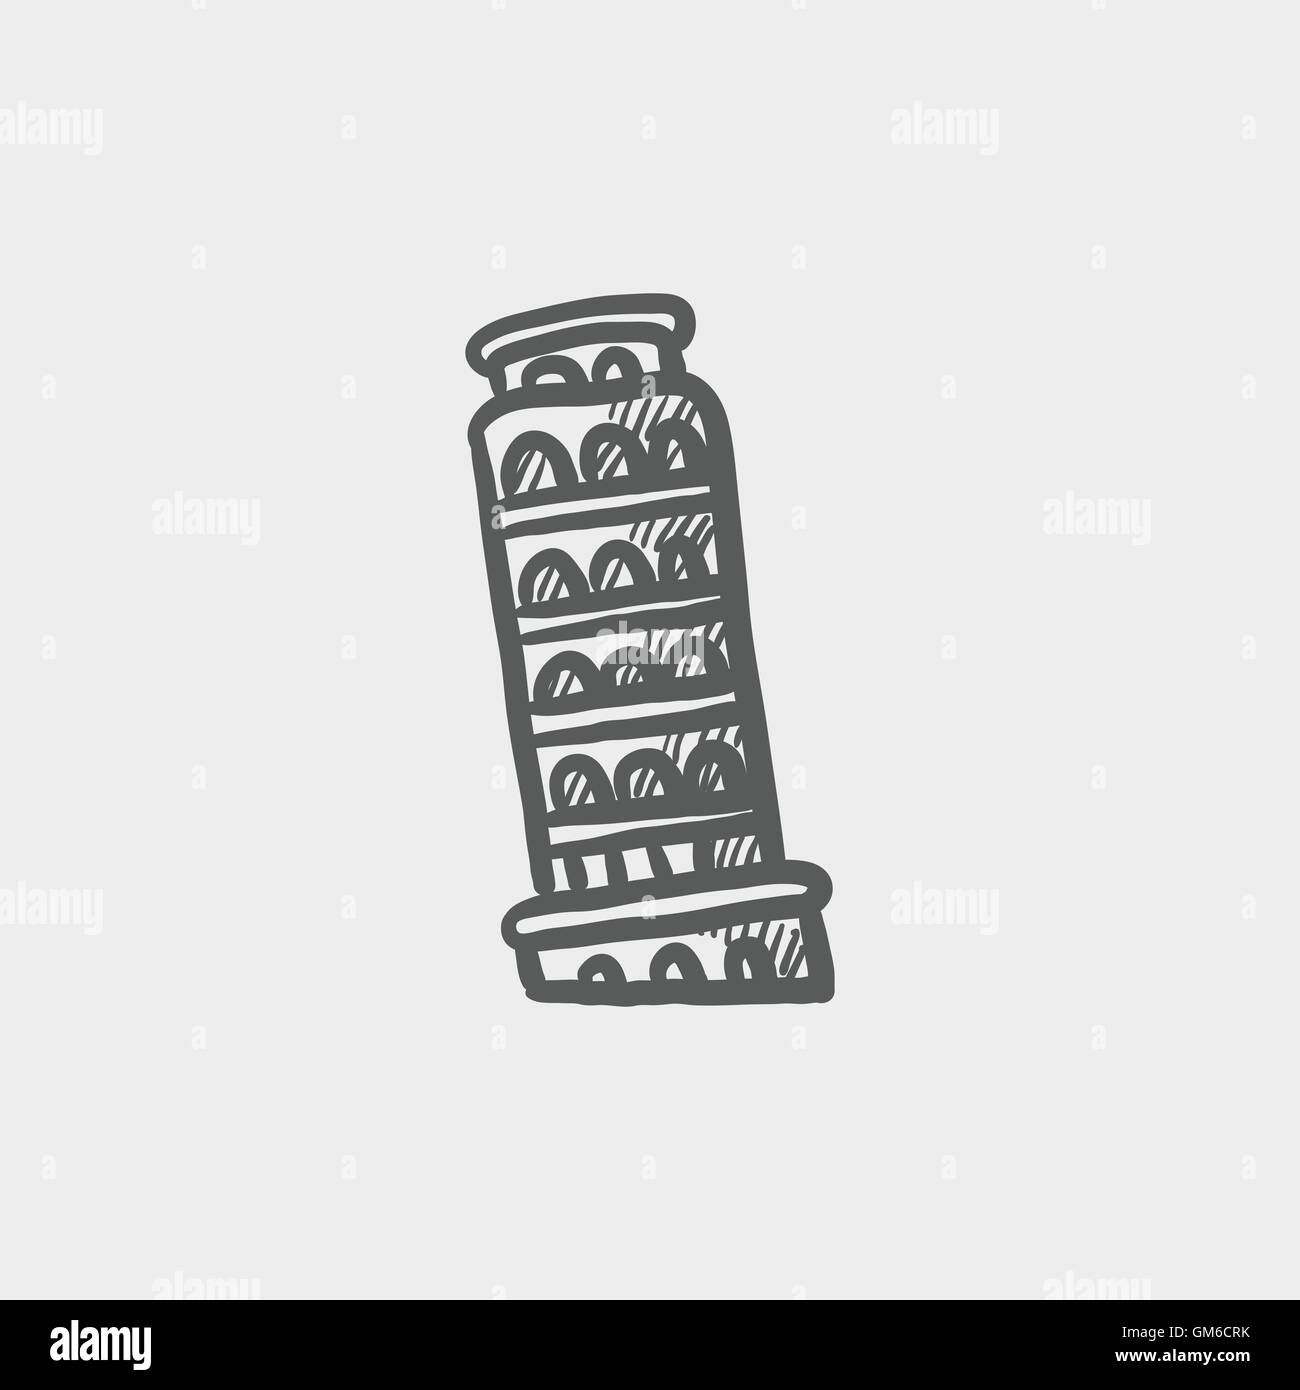 Leaning tower of pisa sketch icon Stock Vector